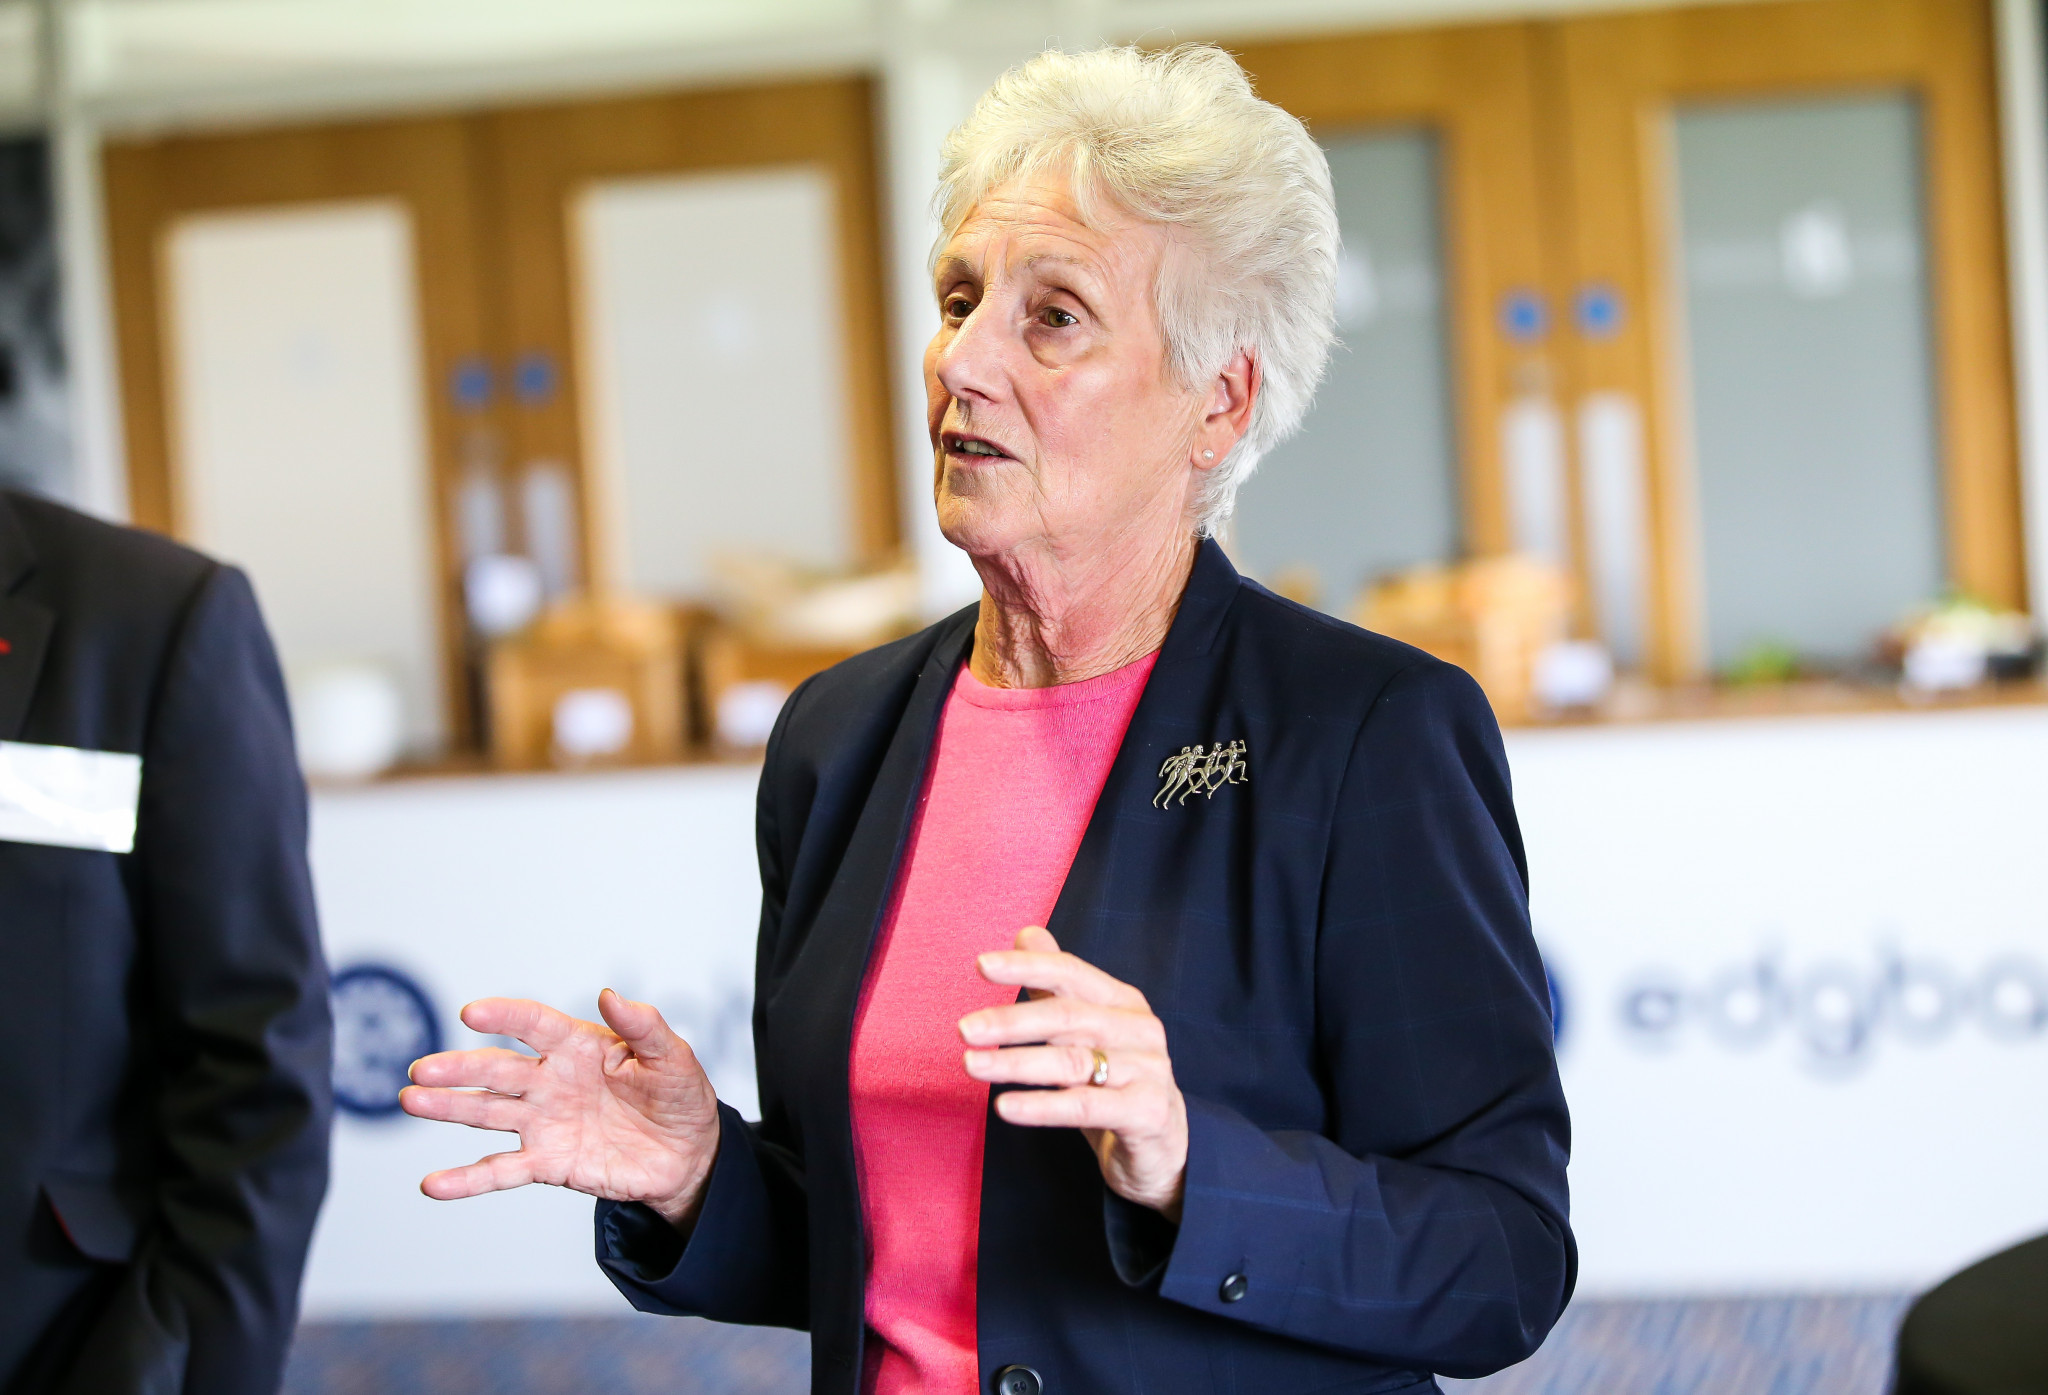 CGF President Dame Louise Martin recently urged the Commonwealth Games Movement to 